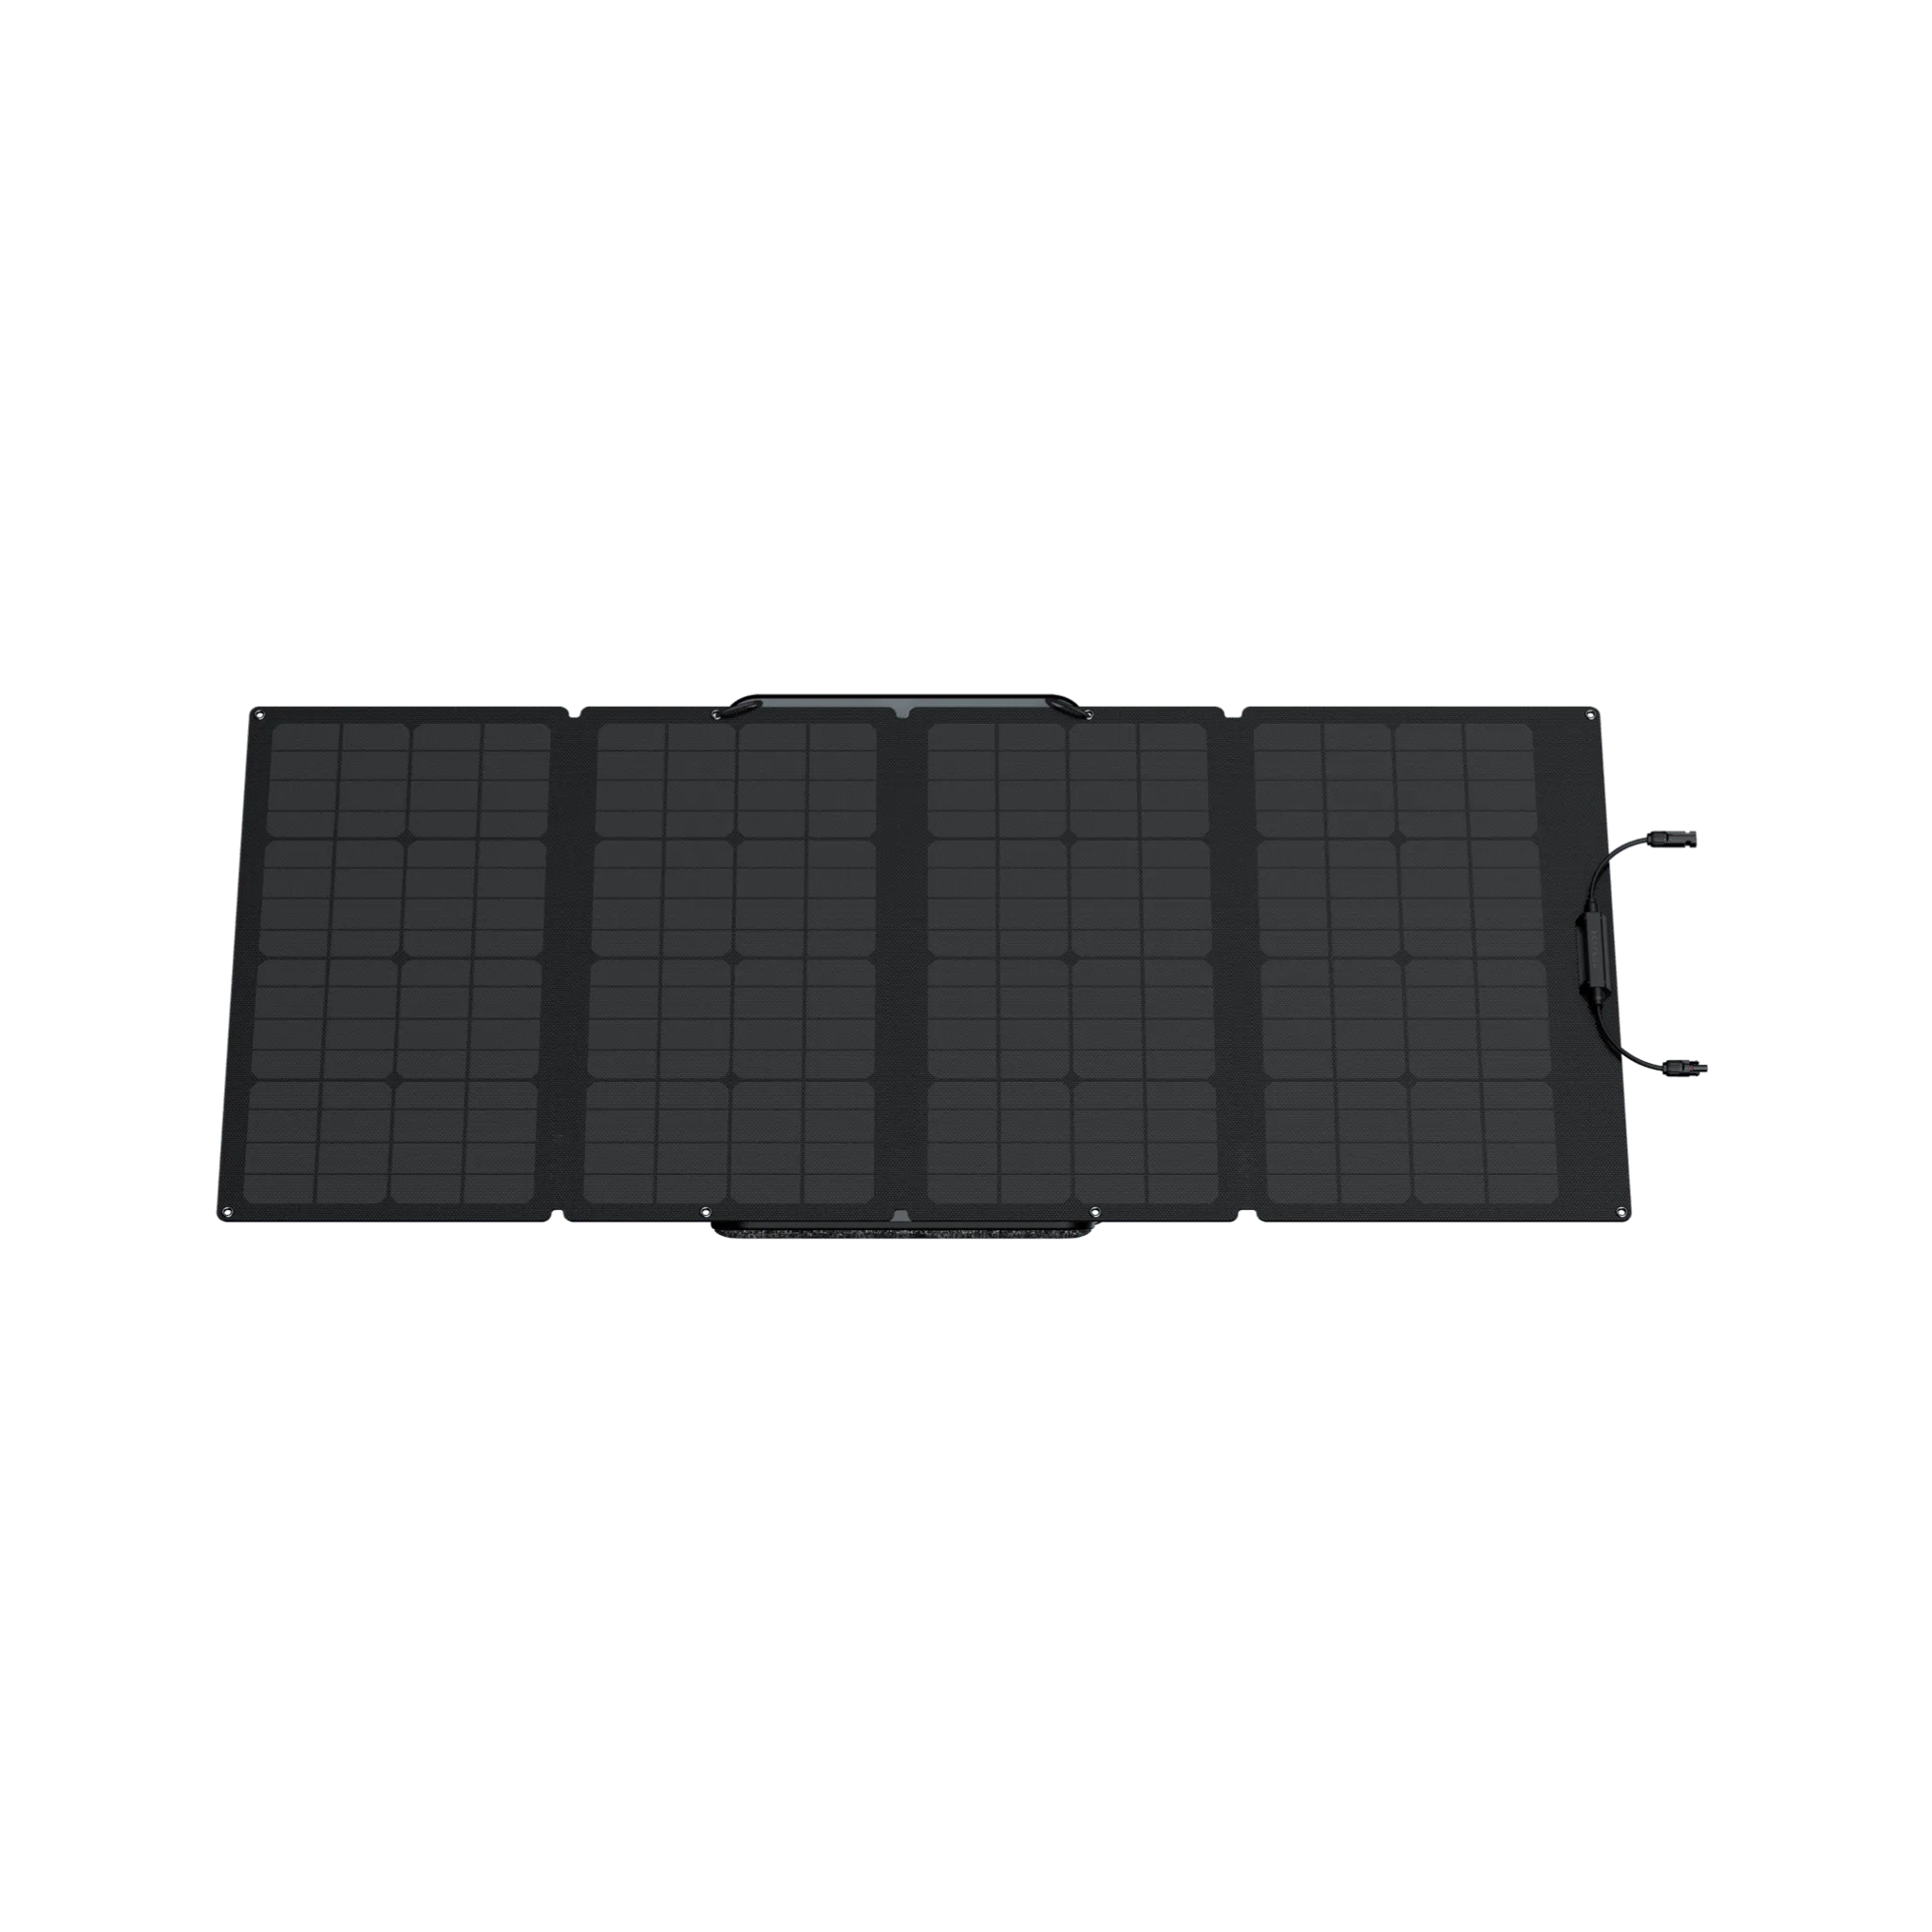 A black solar panel on a white background that is portable and from EcoFlow 160W Portable Solar Panel (SHIPS IN 1-2 WEEKS).